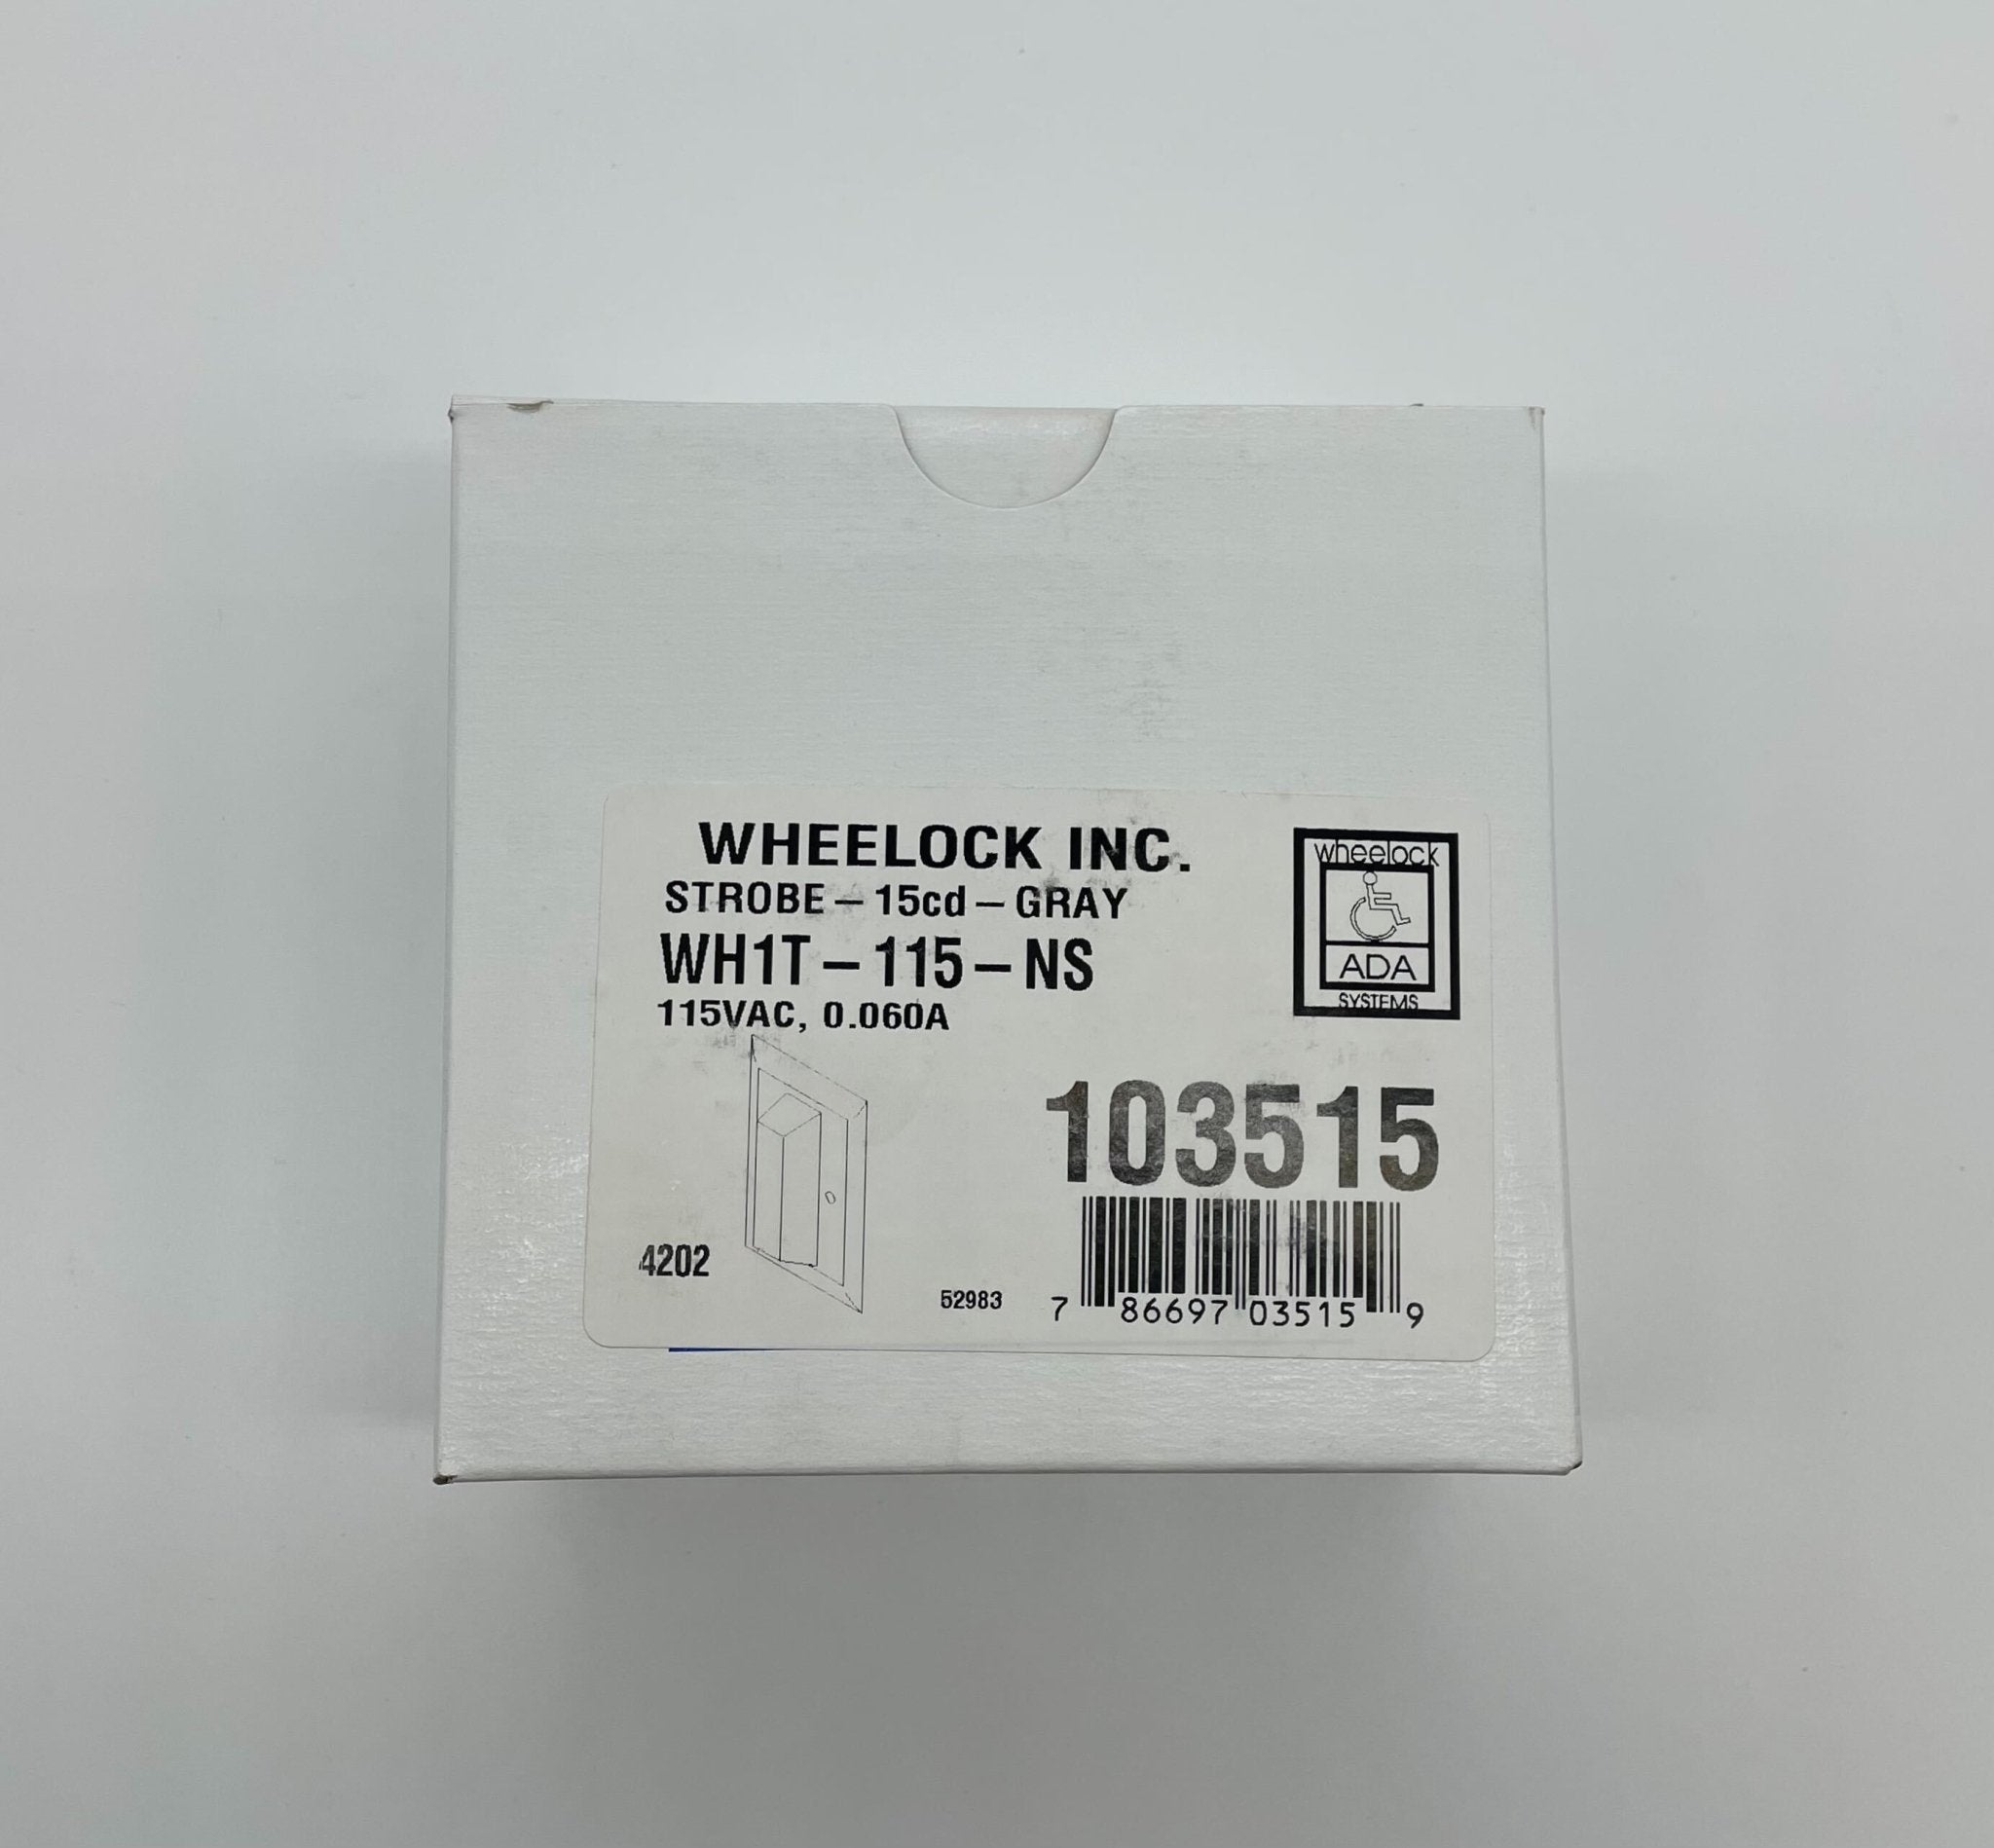 Wheelock WH1T-115-NS - The Fire Alarm Supplier